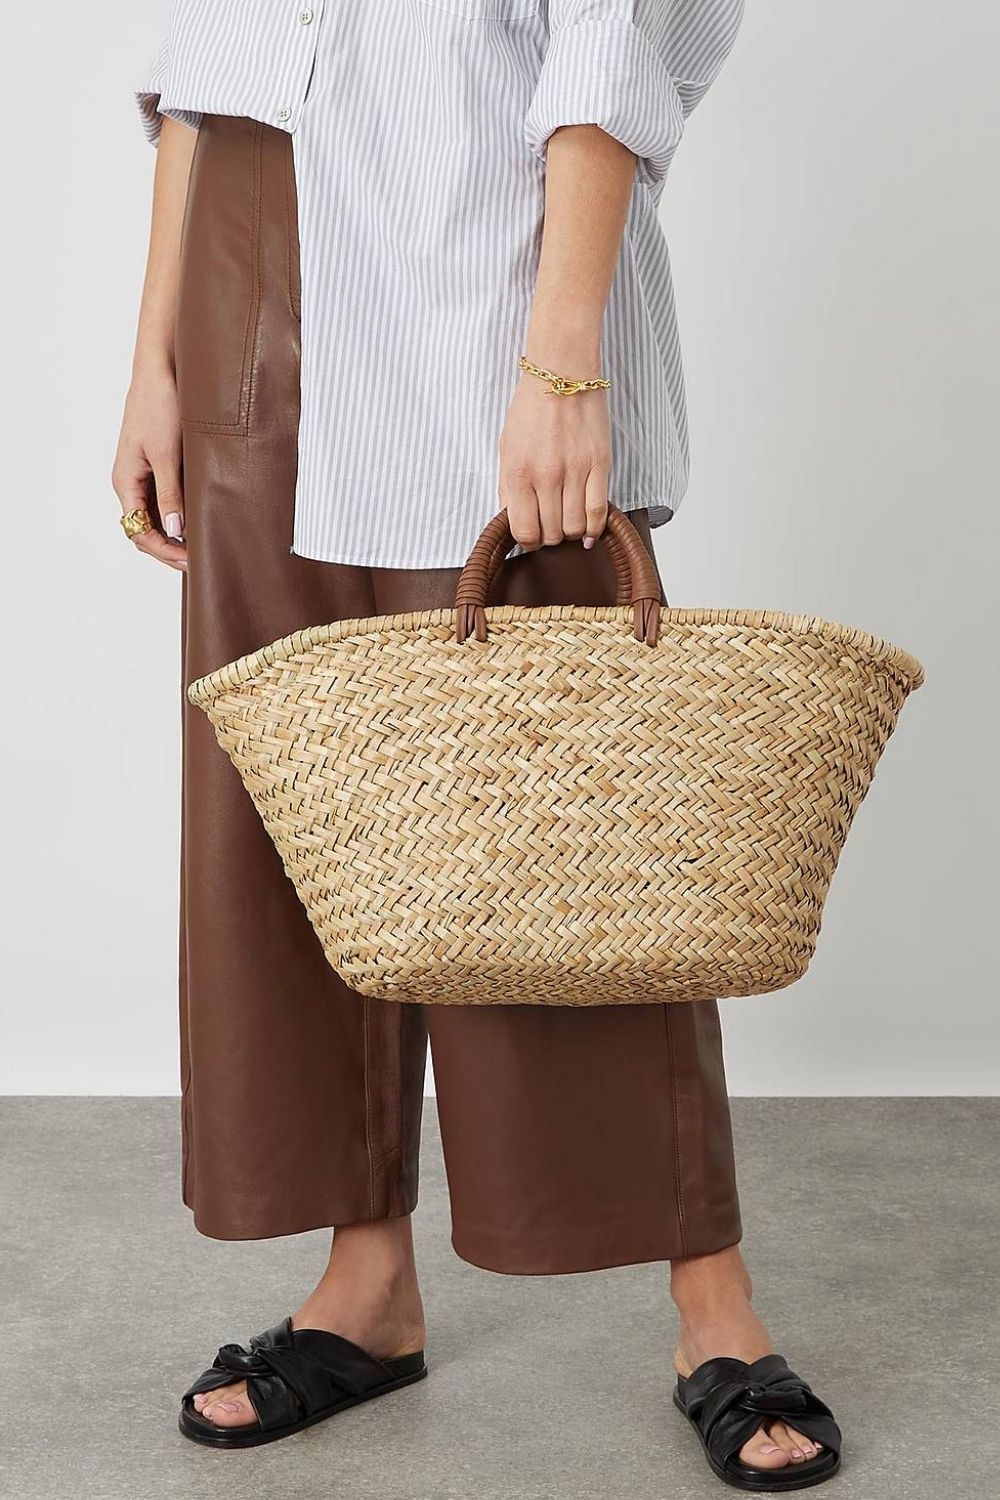 The Best Sustainable Beach & Basket Bags — GNL